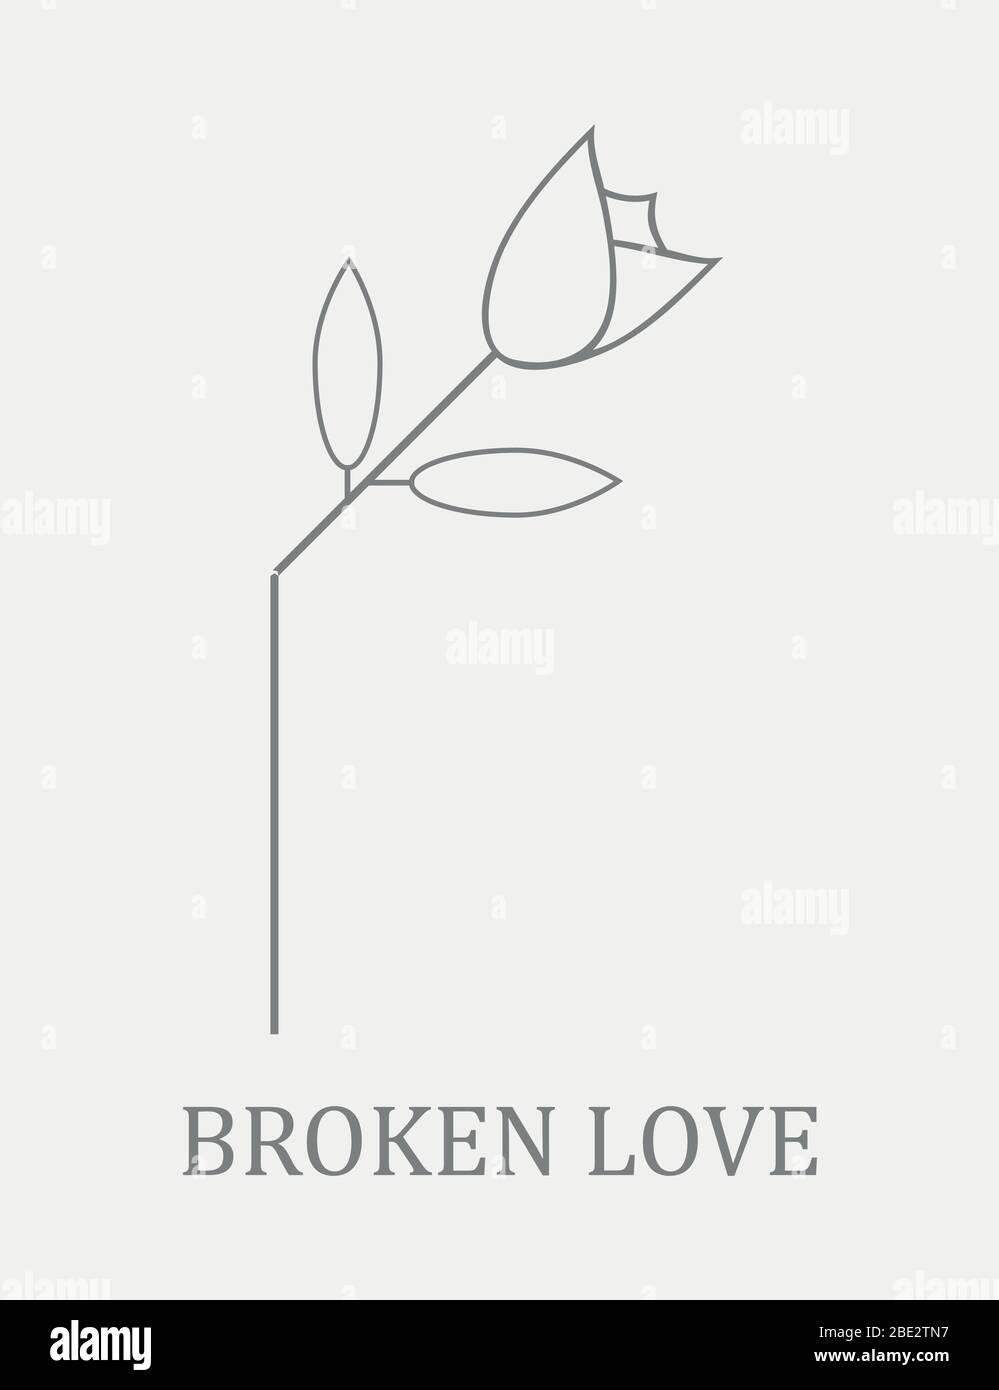 Broken rose, symbol for broken love or friendship, gray and white minimalism vector illustration logo with copy space Stock Vector